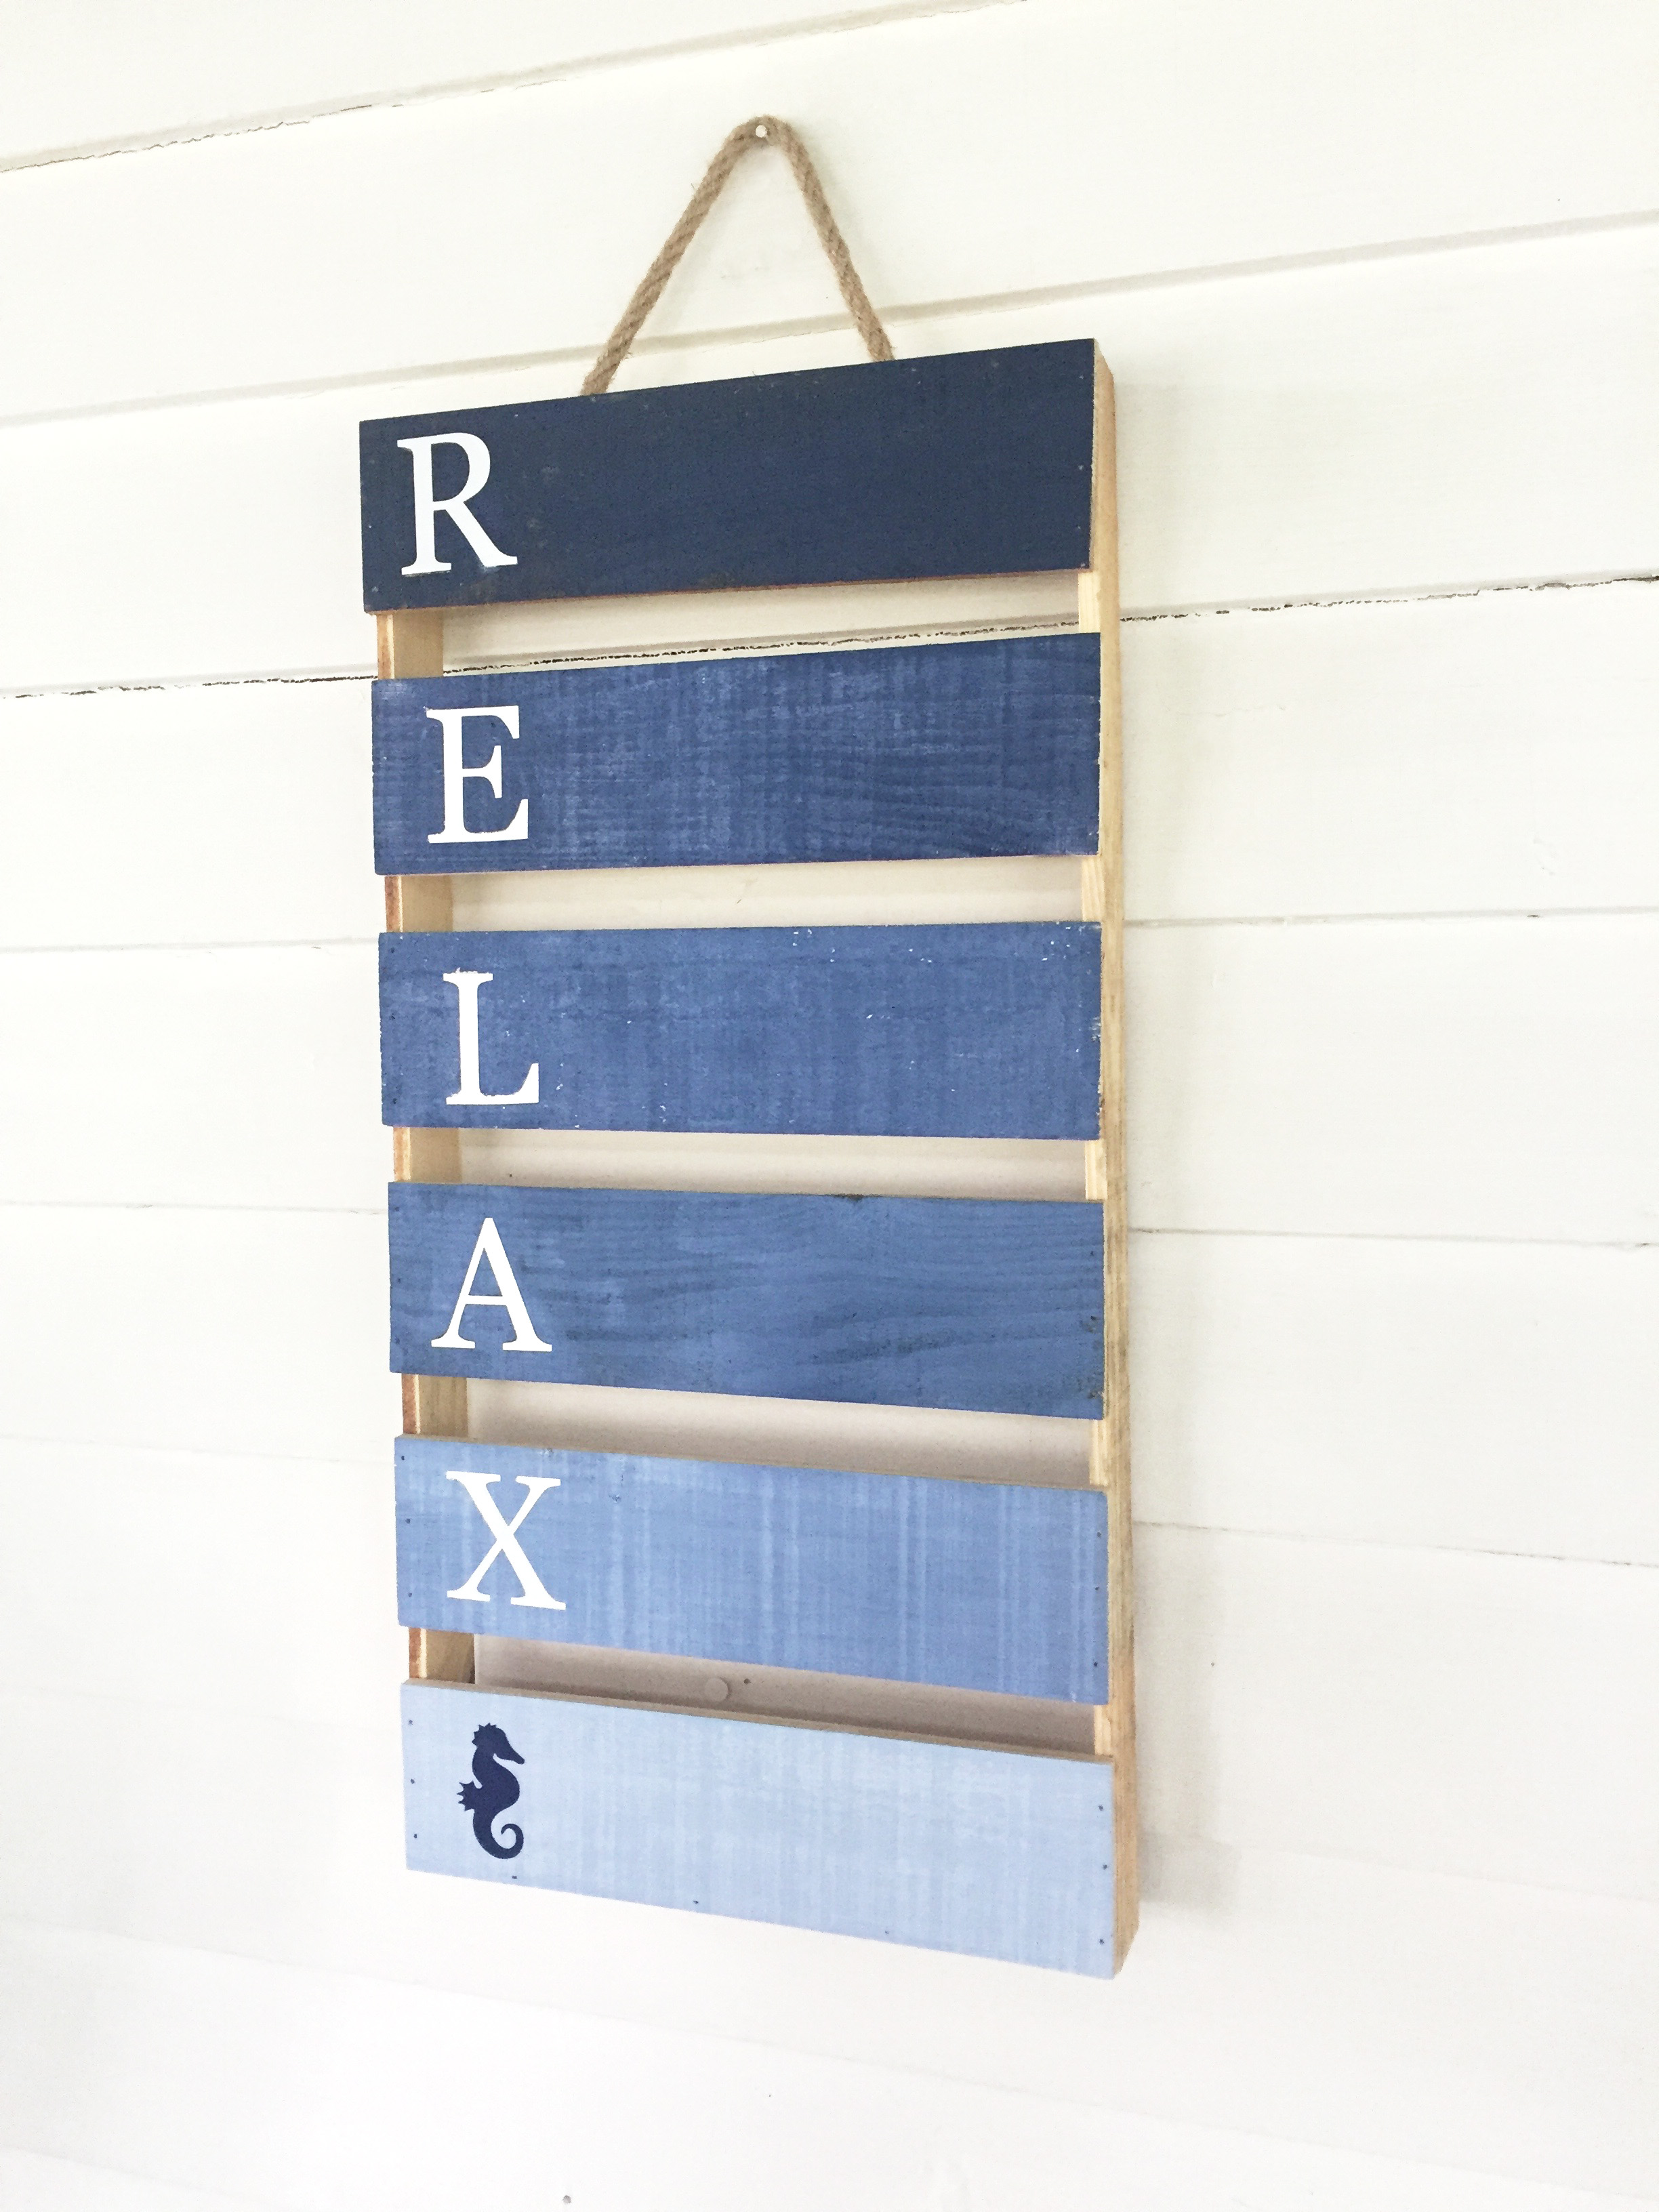 DIY Wooden Pallet Relax Sign with Blue Ombre